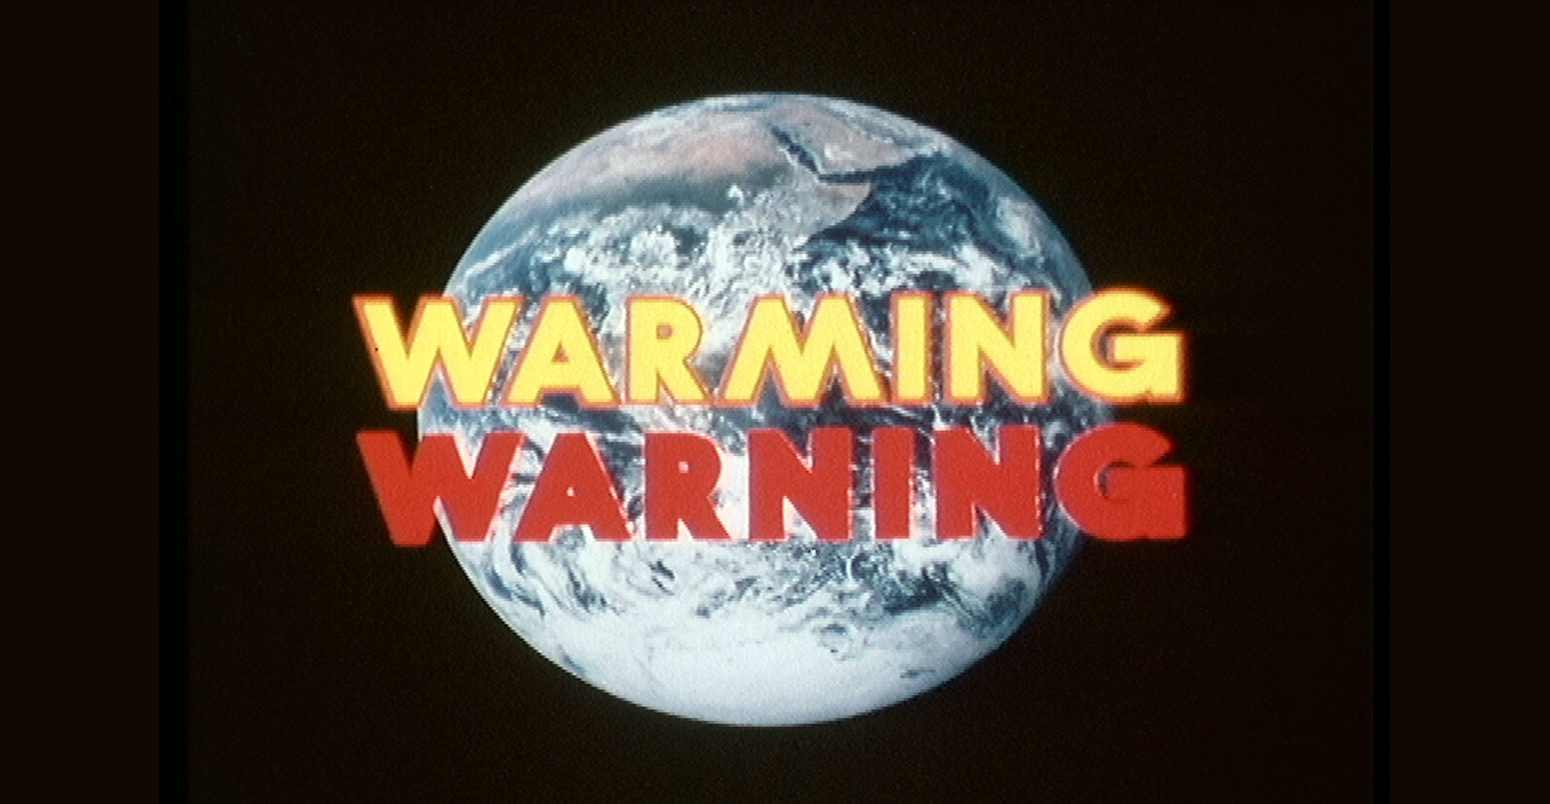 Warming warning a 1981 documentary about climate change